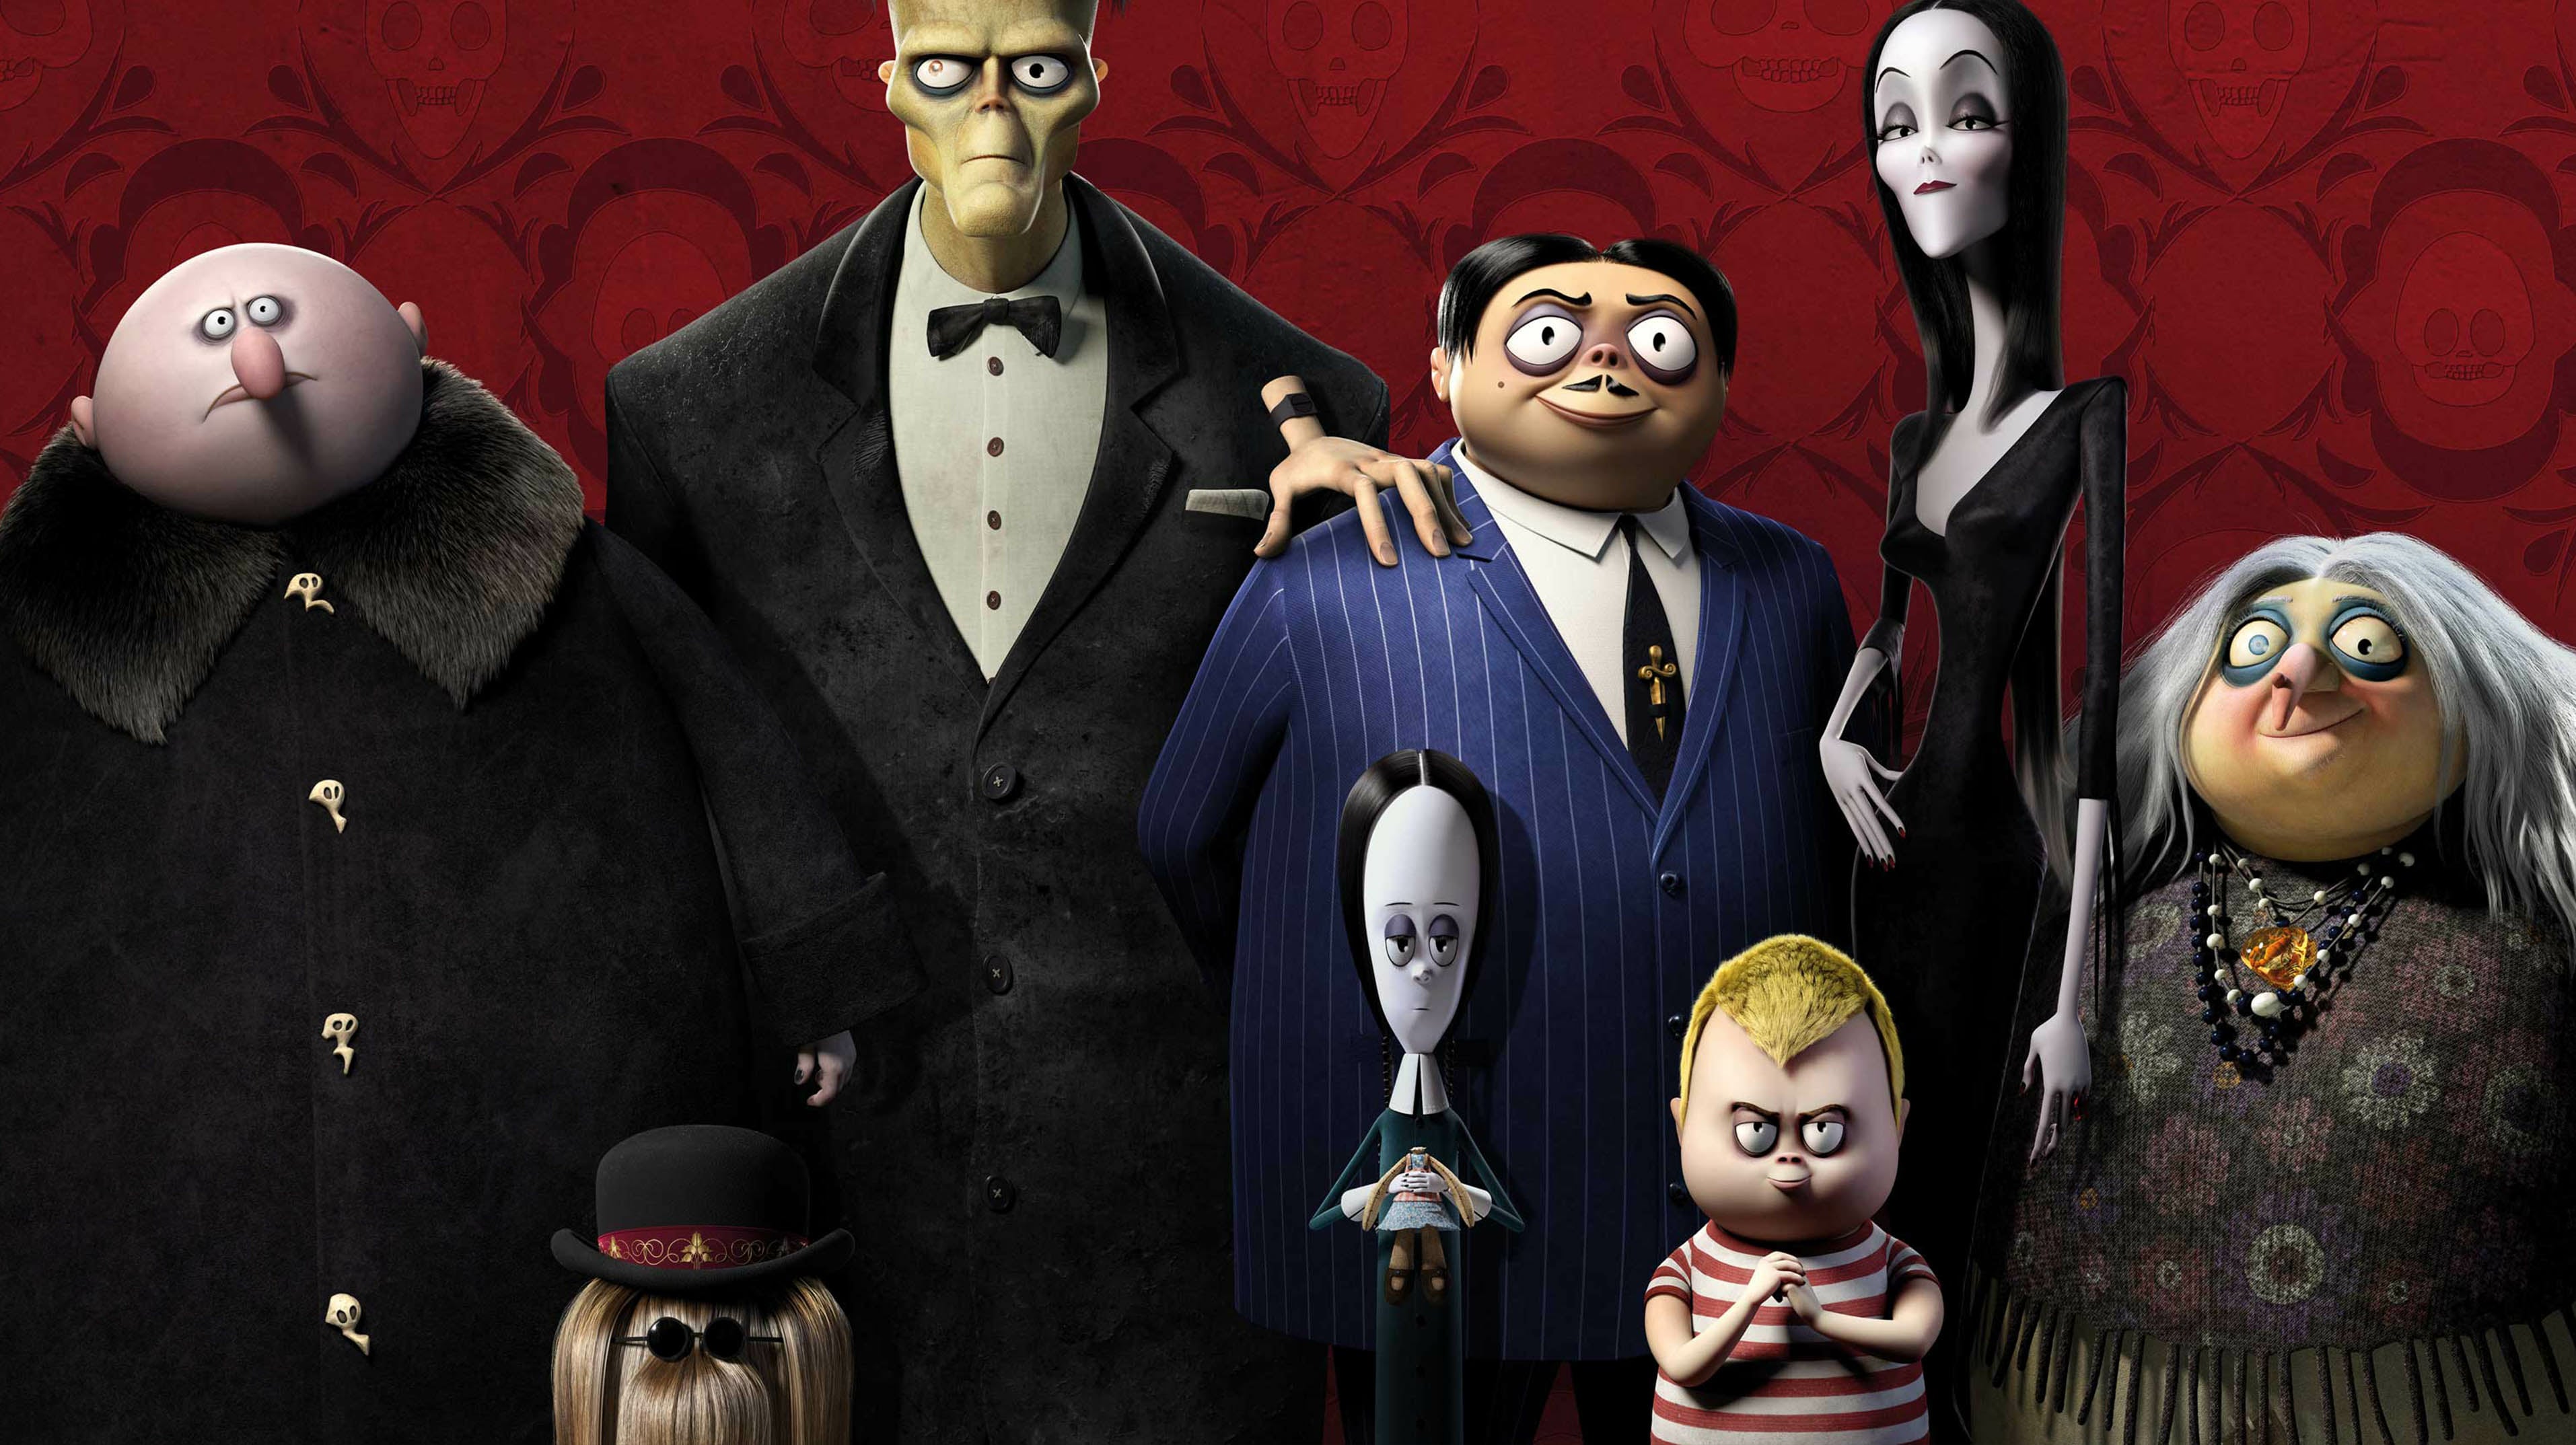 The Addams Family Wallpapers High Quality | Download Free